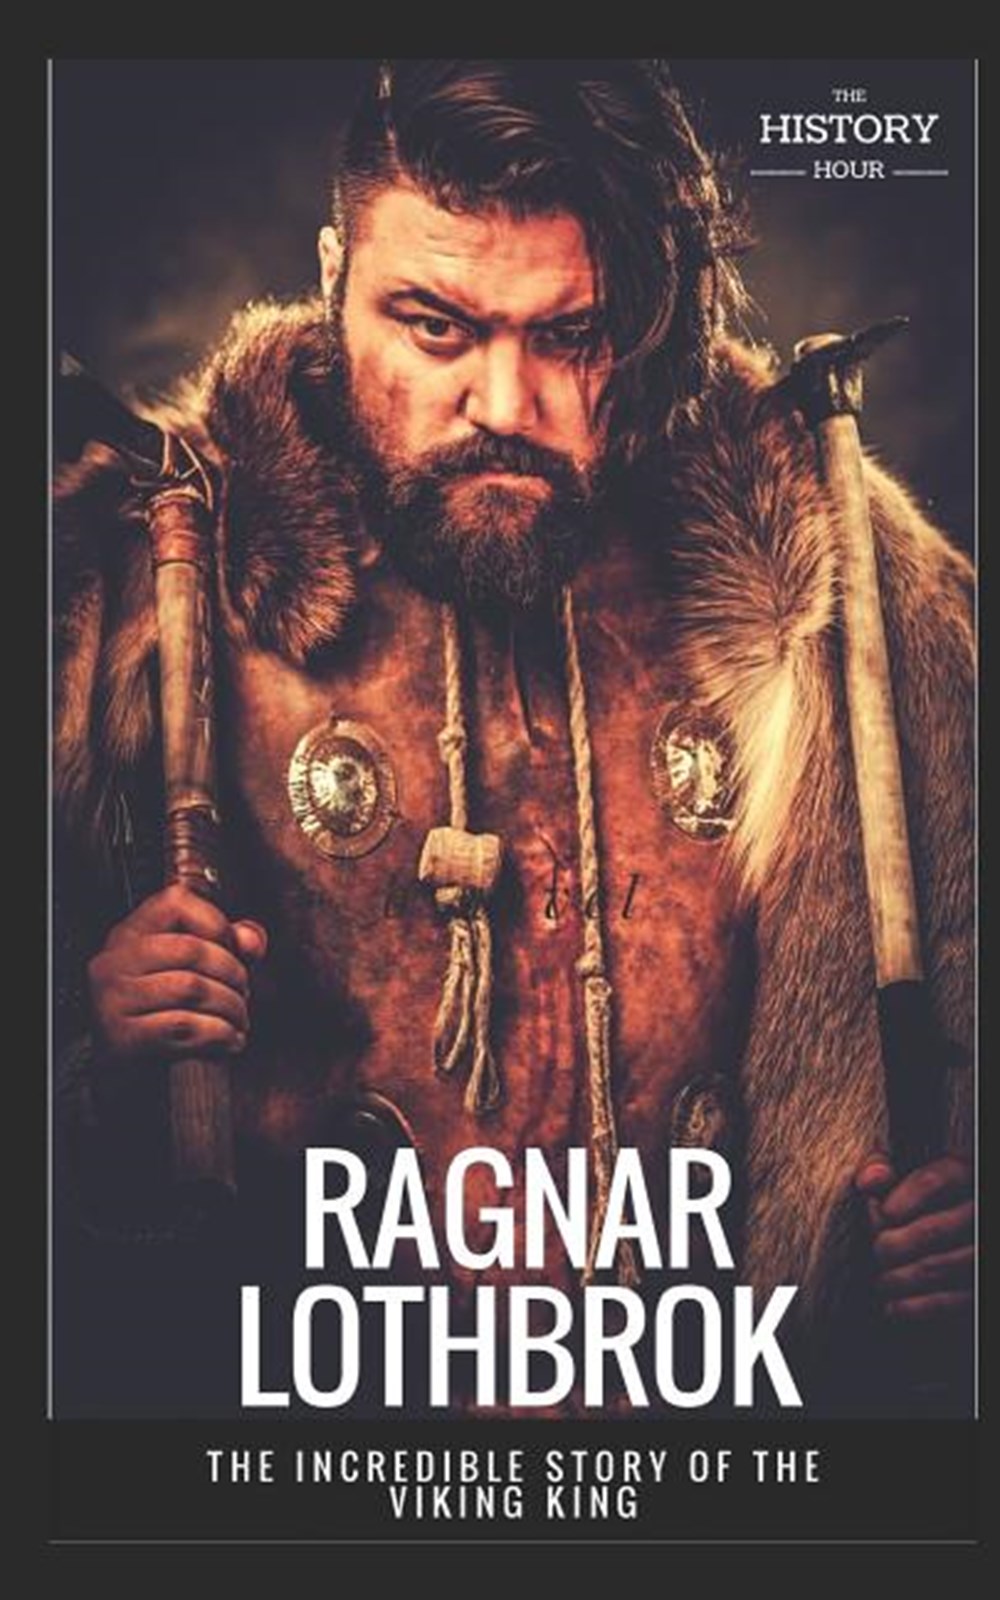 Ragnar Lothbrok The Incredible Story of The Viking King